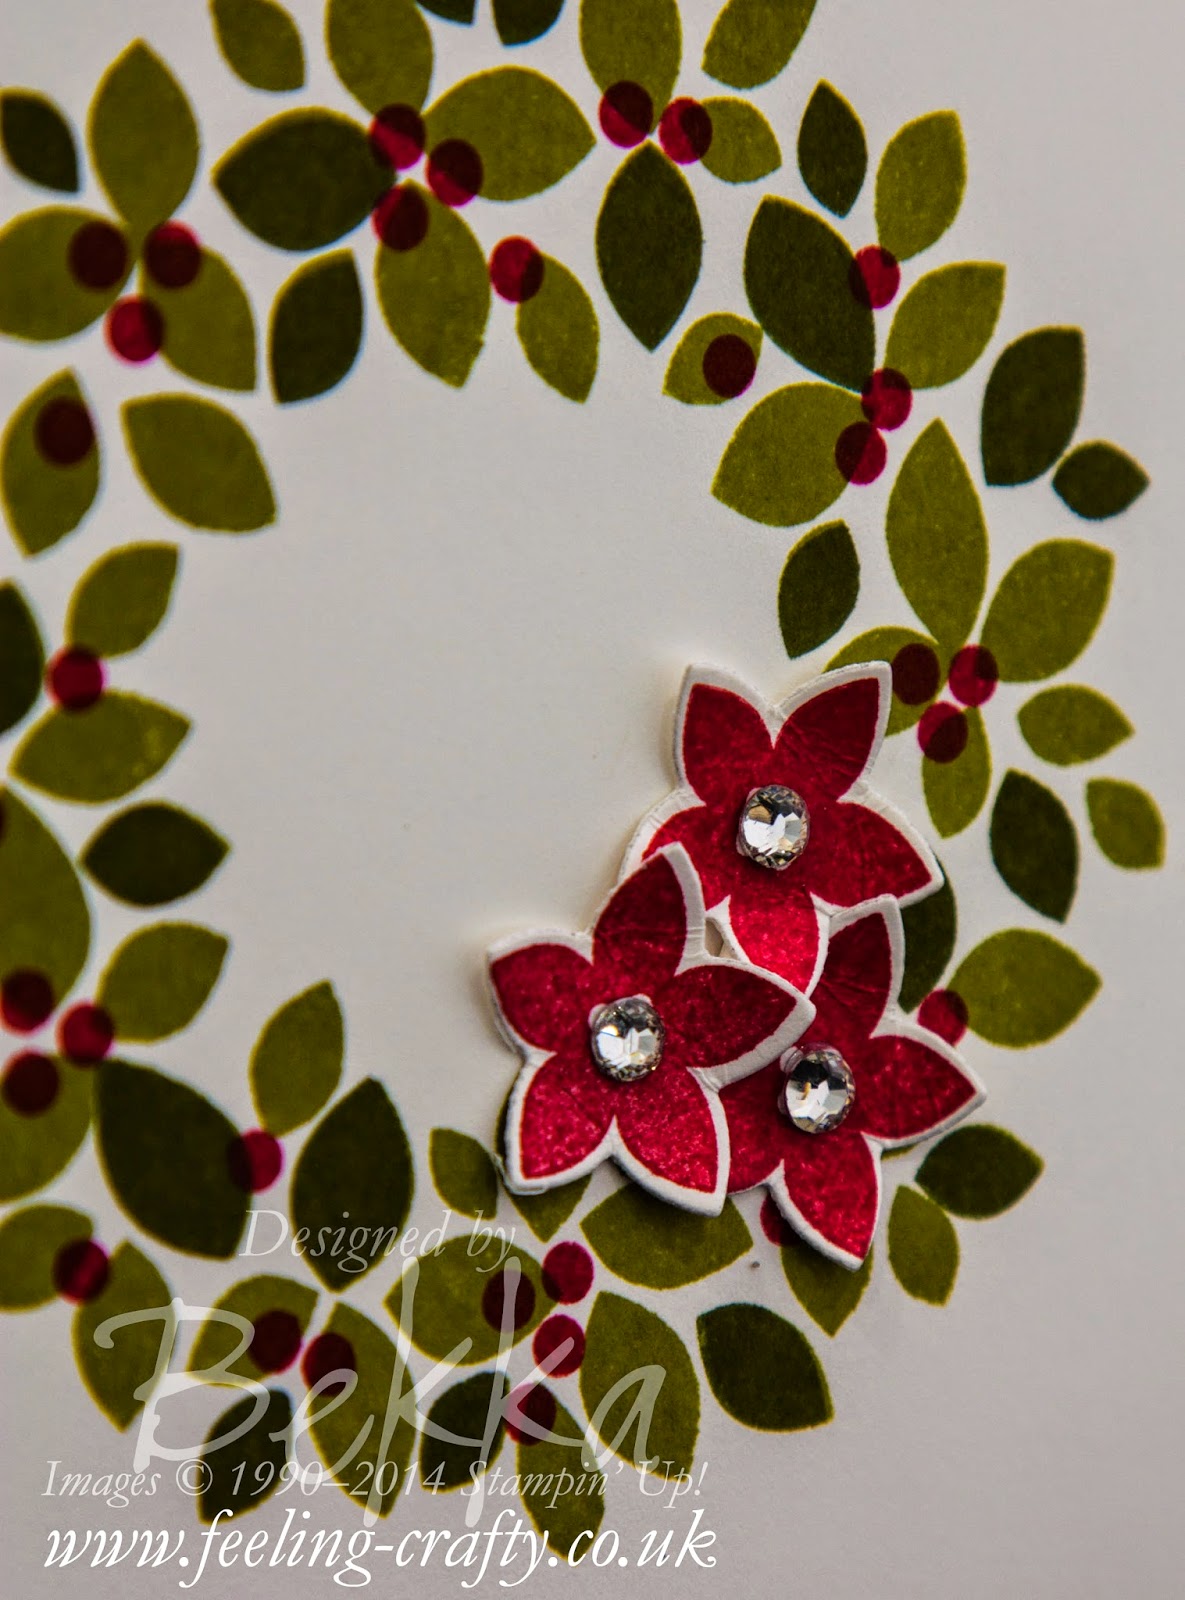 Wondrous Wreath Christmas Card by Stampin' Up! UK Independent Demonstrator Bekka Prideaux - check this blog for lots of great ideas